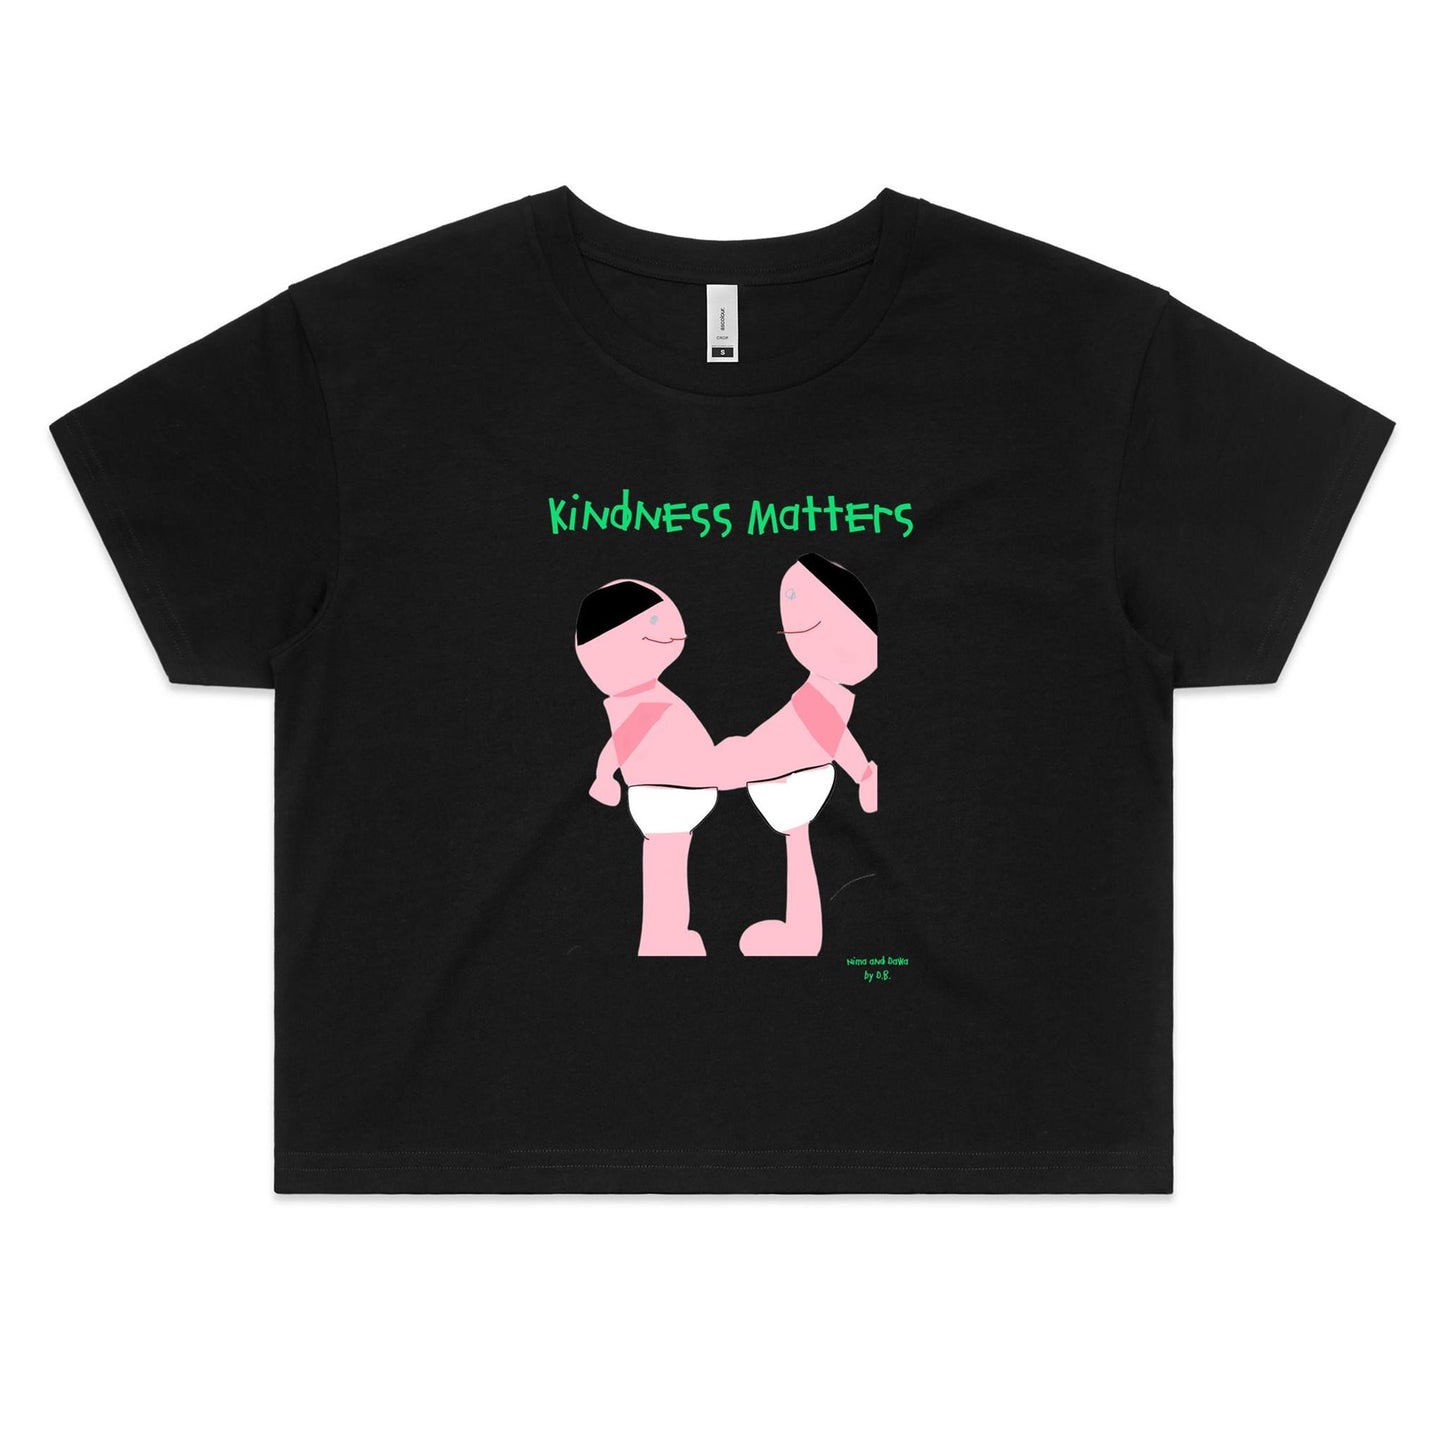 Kindness Matters featuring Nima and Dawa by D.B. print on Women's Crop Tee